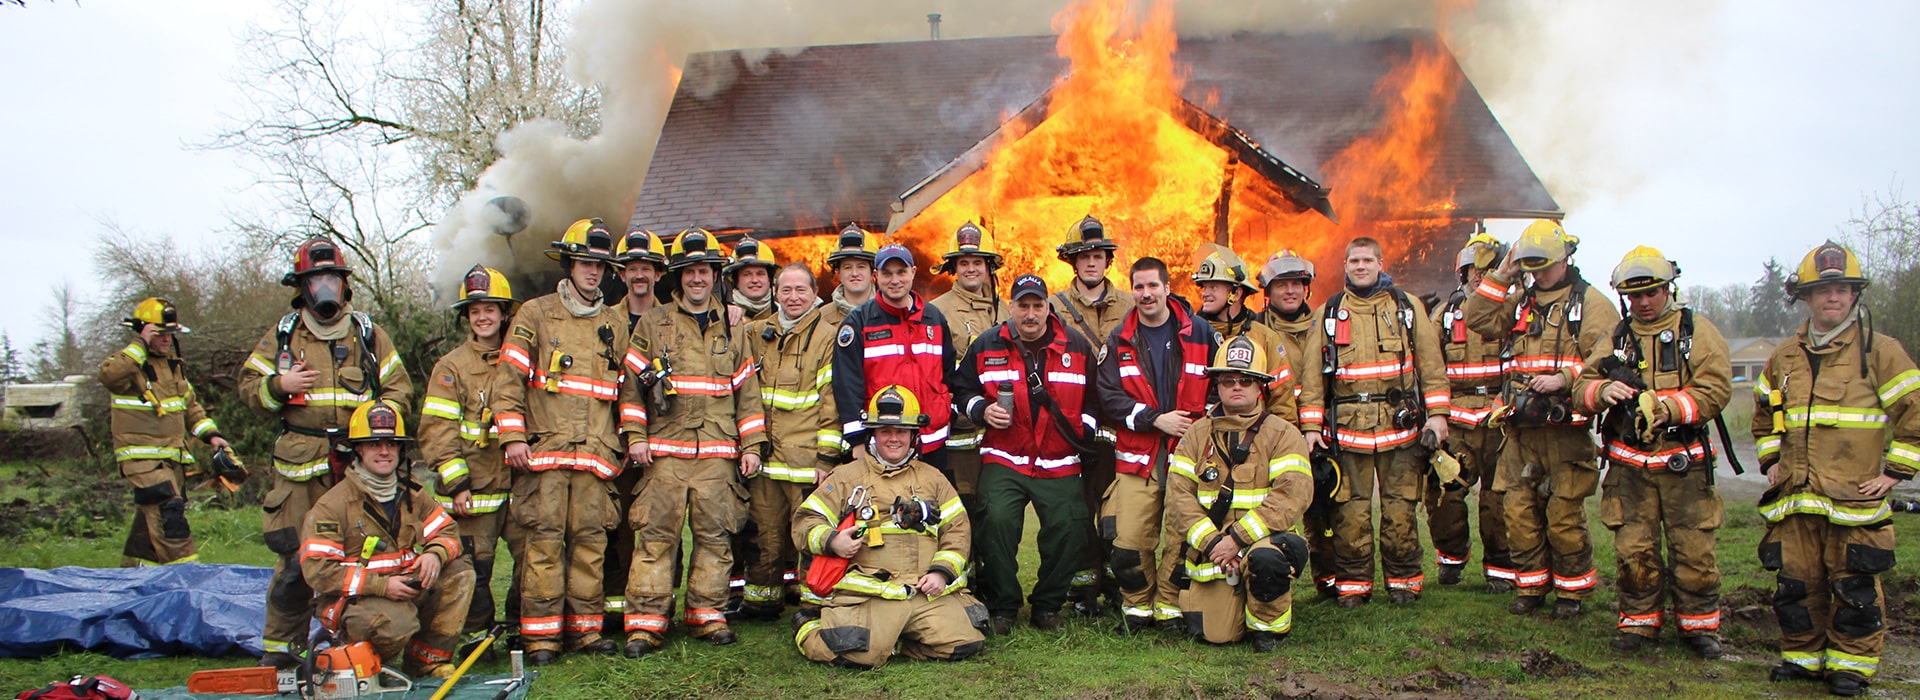 A group of Molalla firefighters standing in front of a training burn at a home donated to the fire district for training